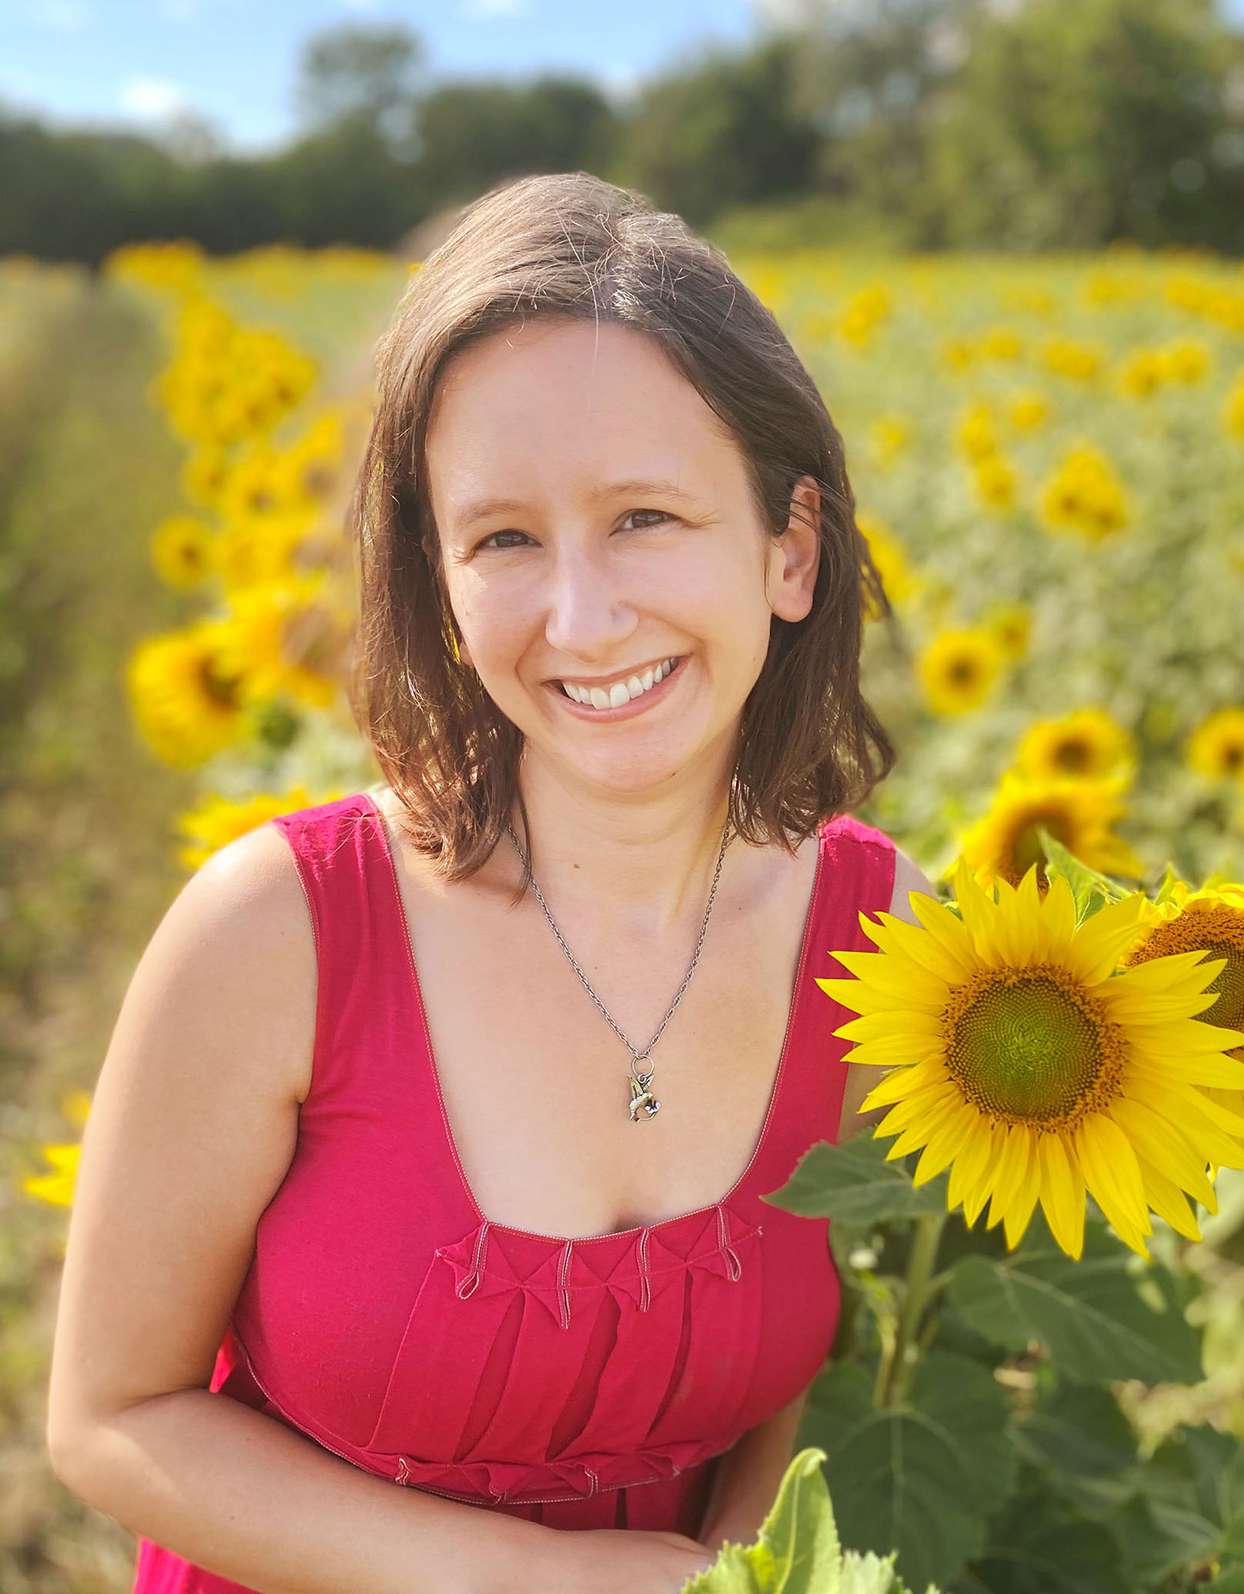 woman in red dress smiling in field of sunflowers